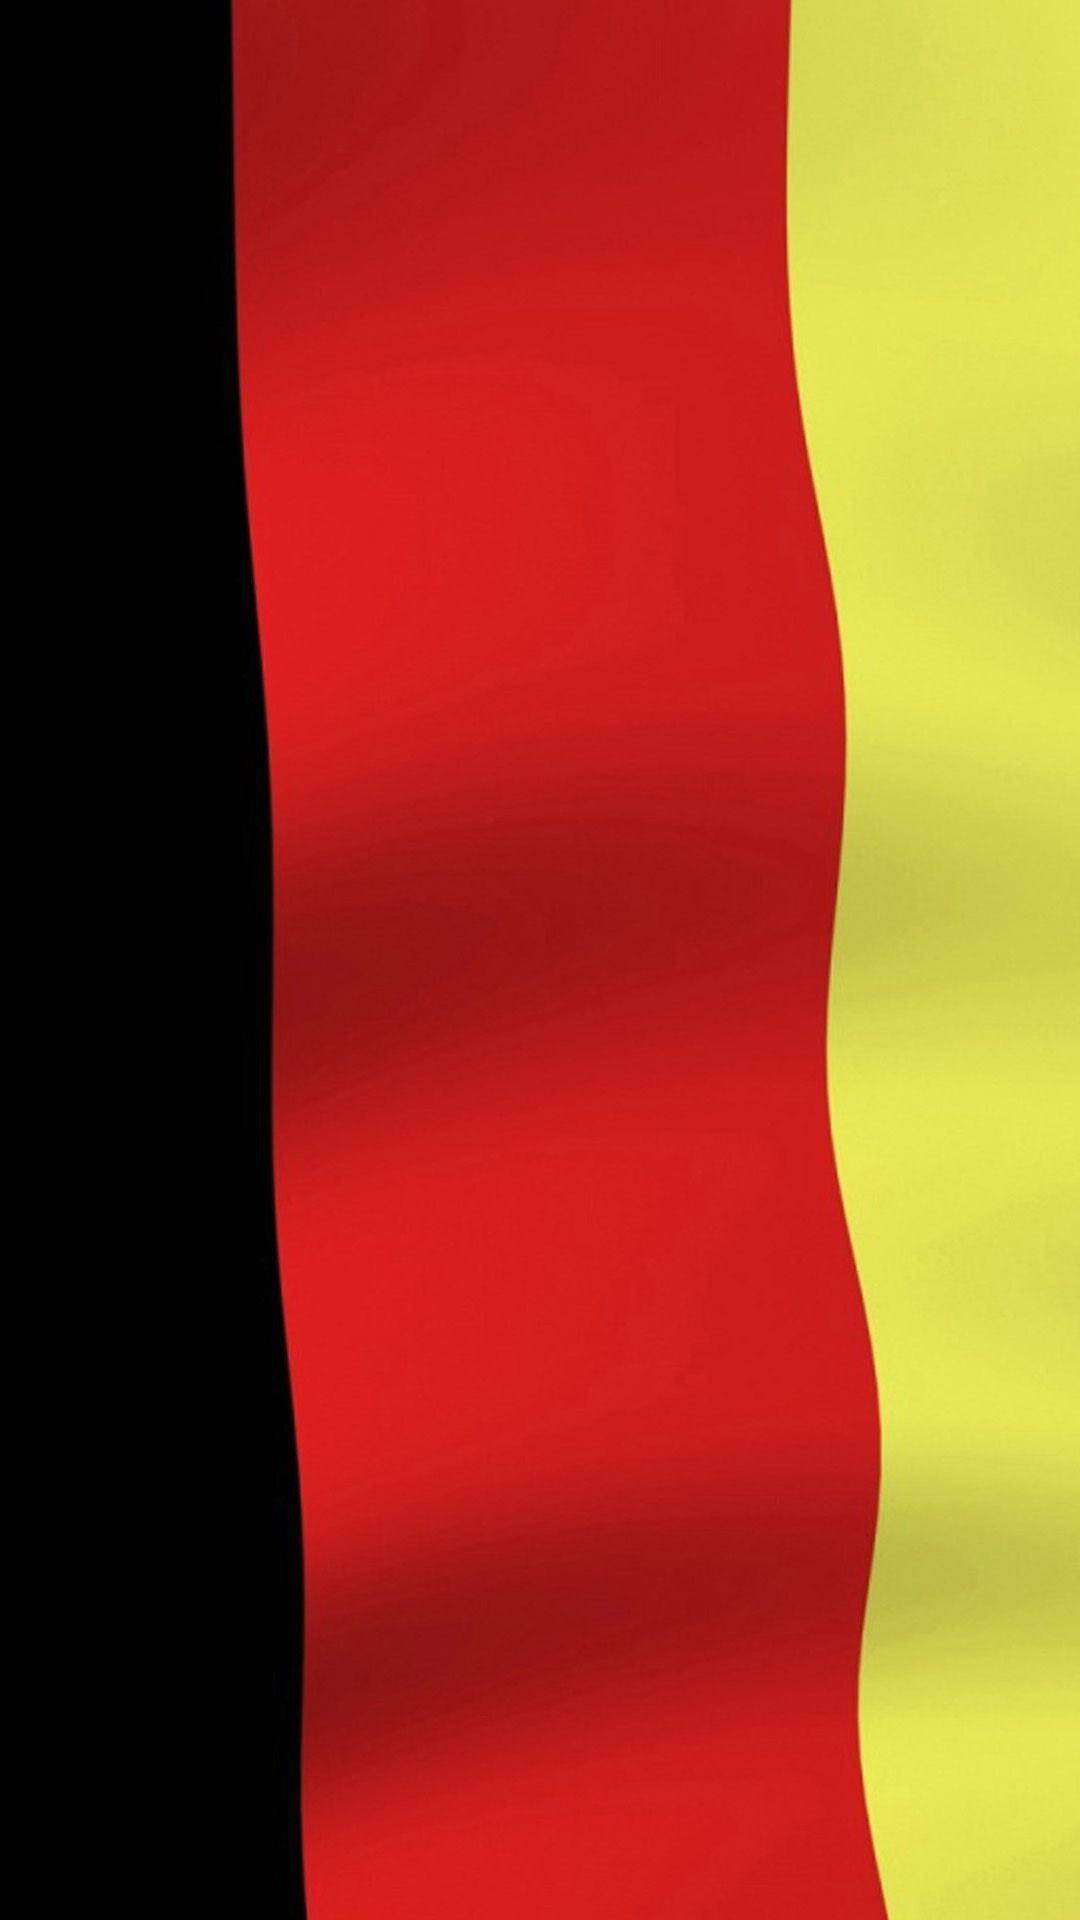 Germany Flag Wallpapers - Top 30 Best Germany Flag Wallpapers Download